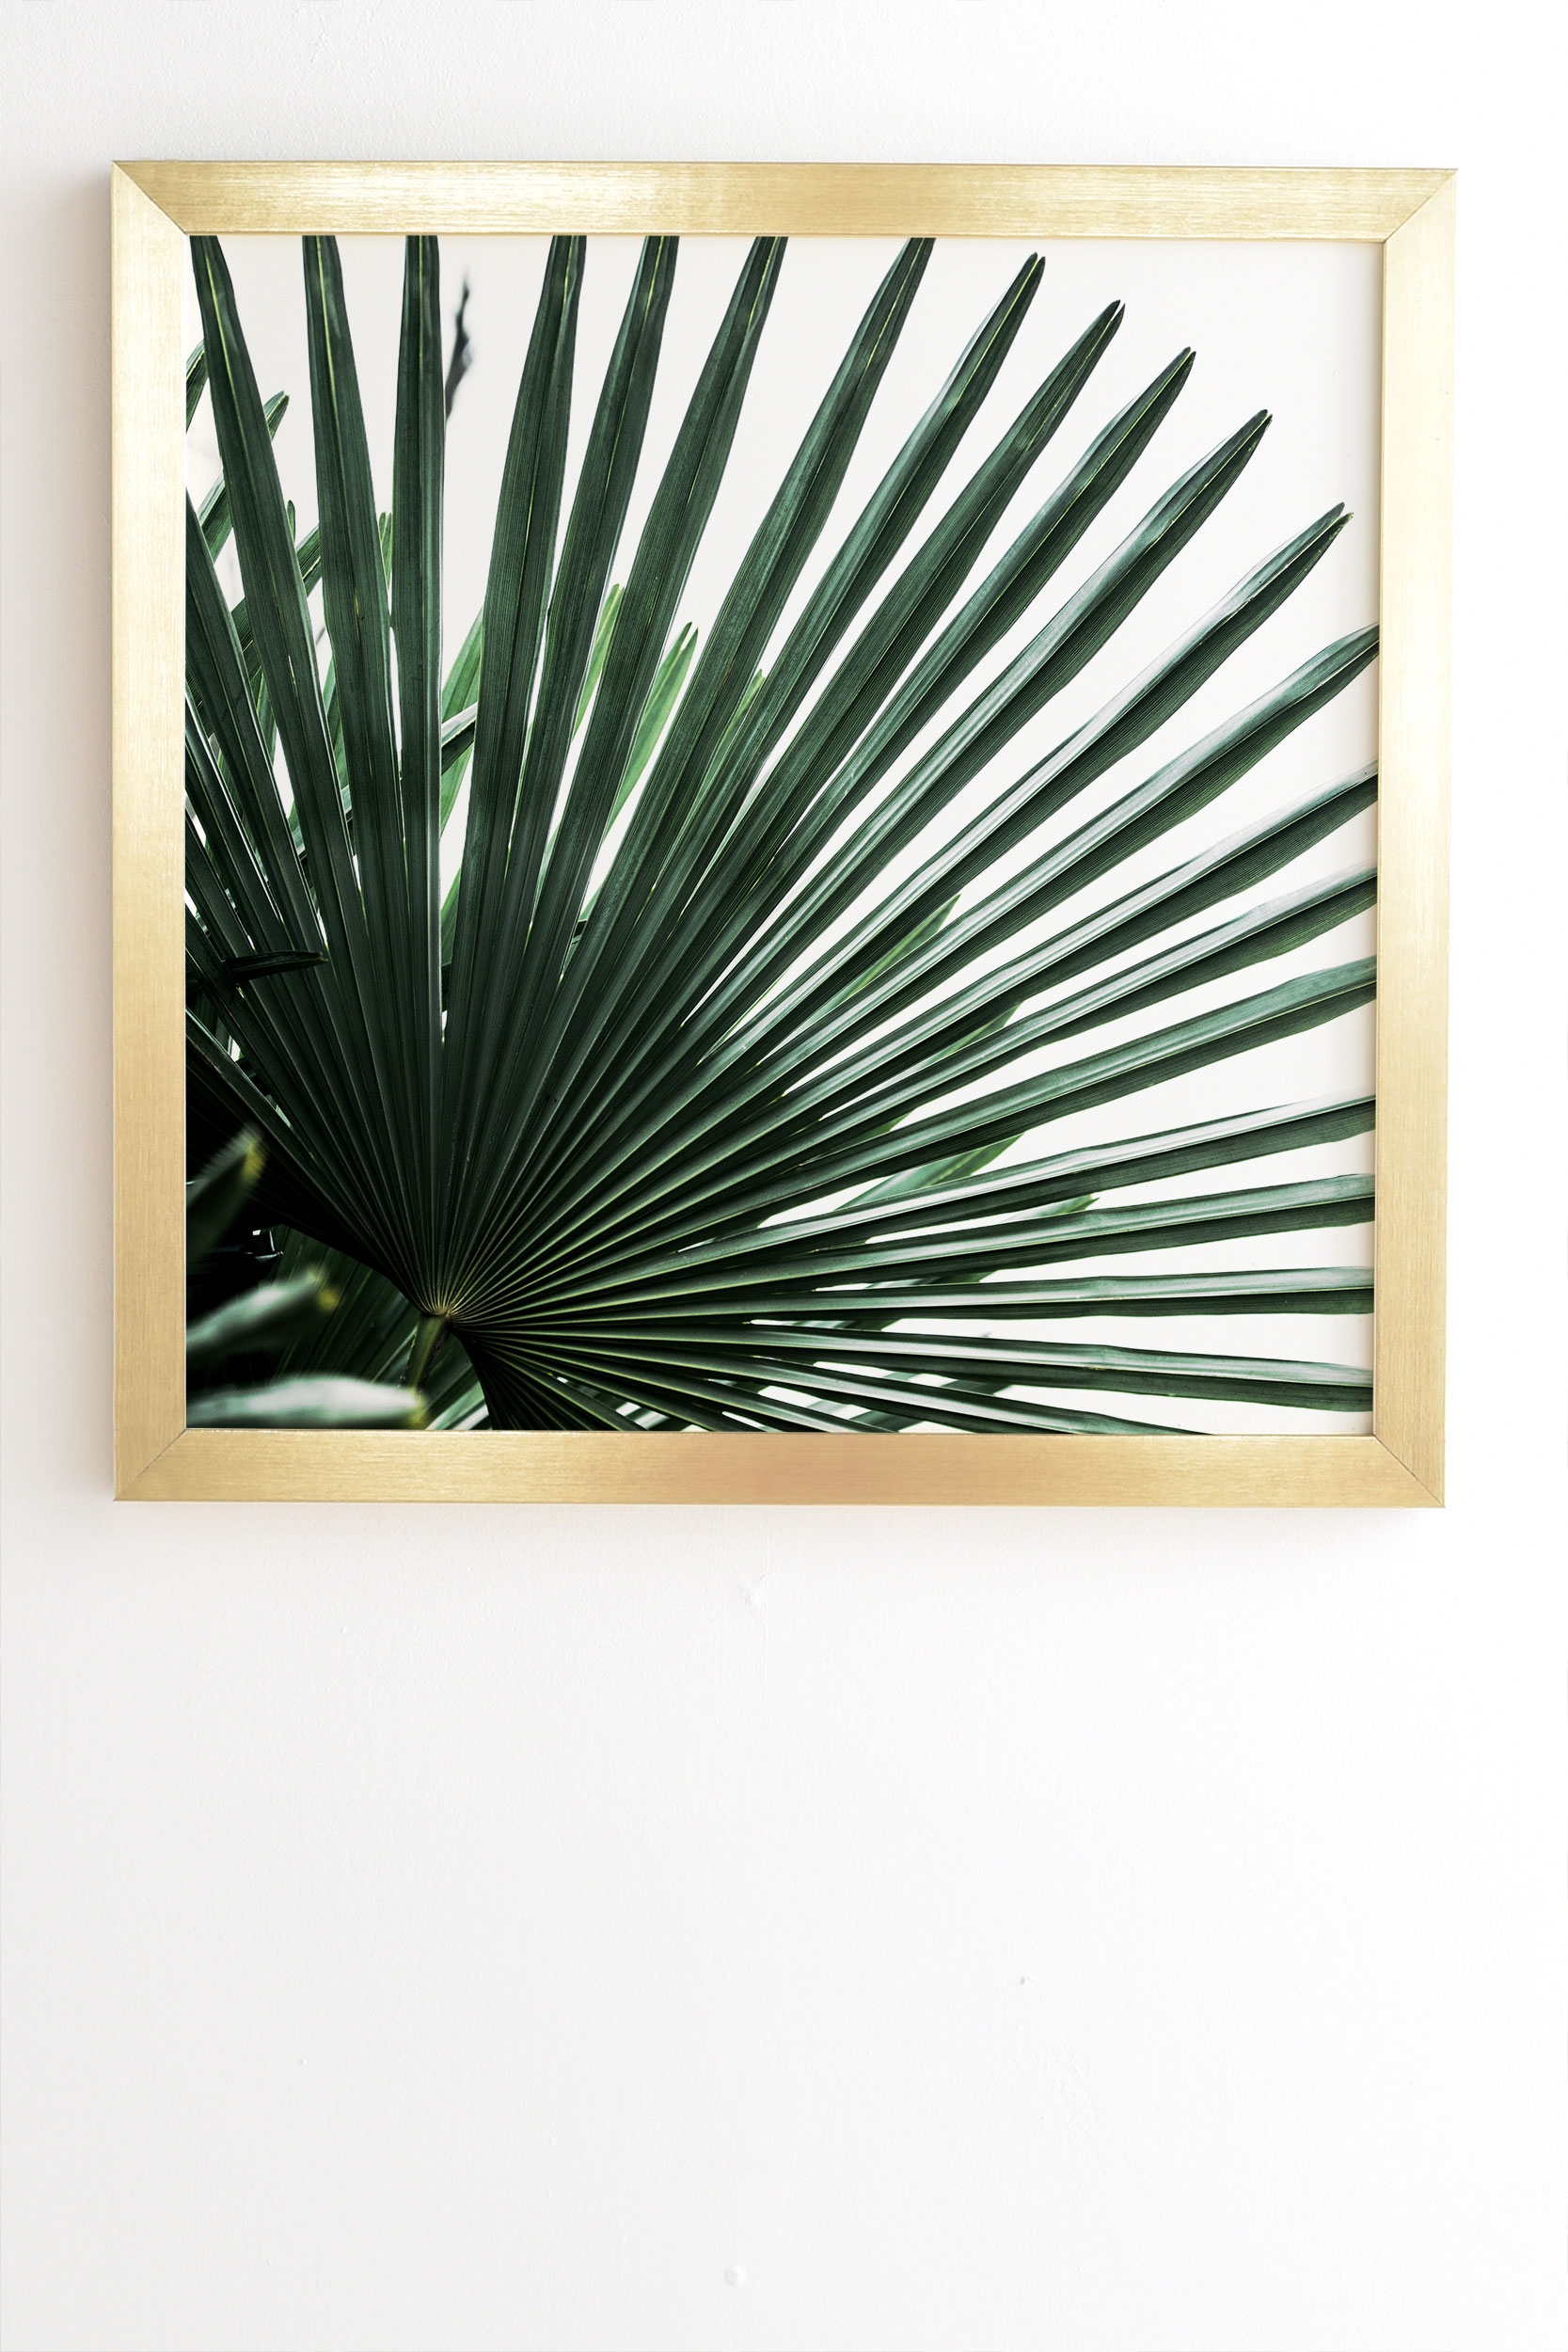 Palm Leaves 13 by Mareike Boehmer - Framed Wall Art Basic Gold 12" x 12" - Image 1